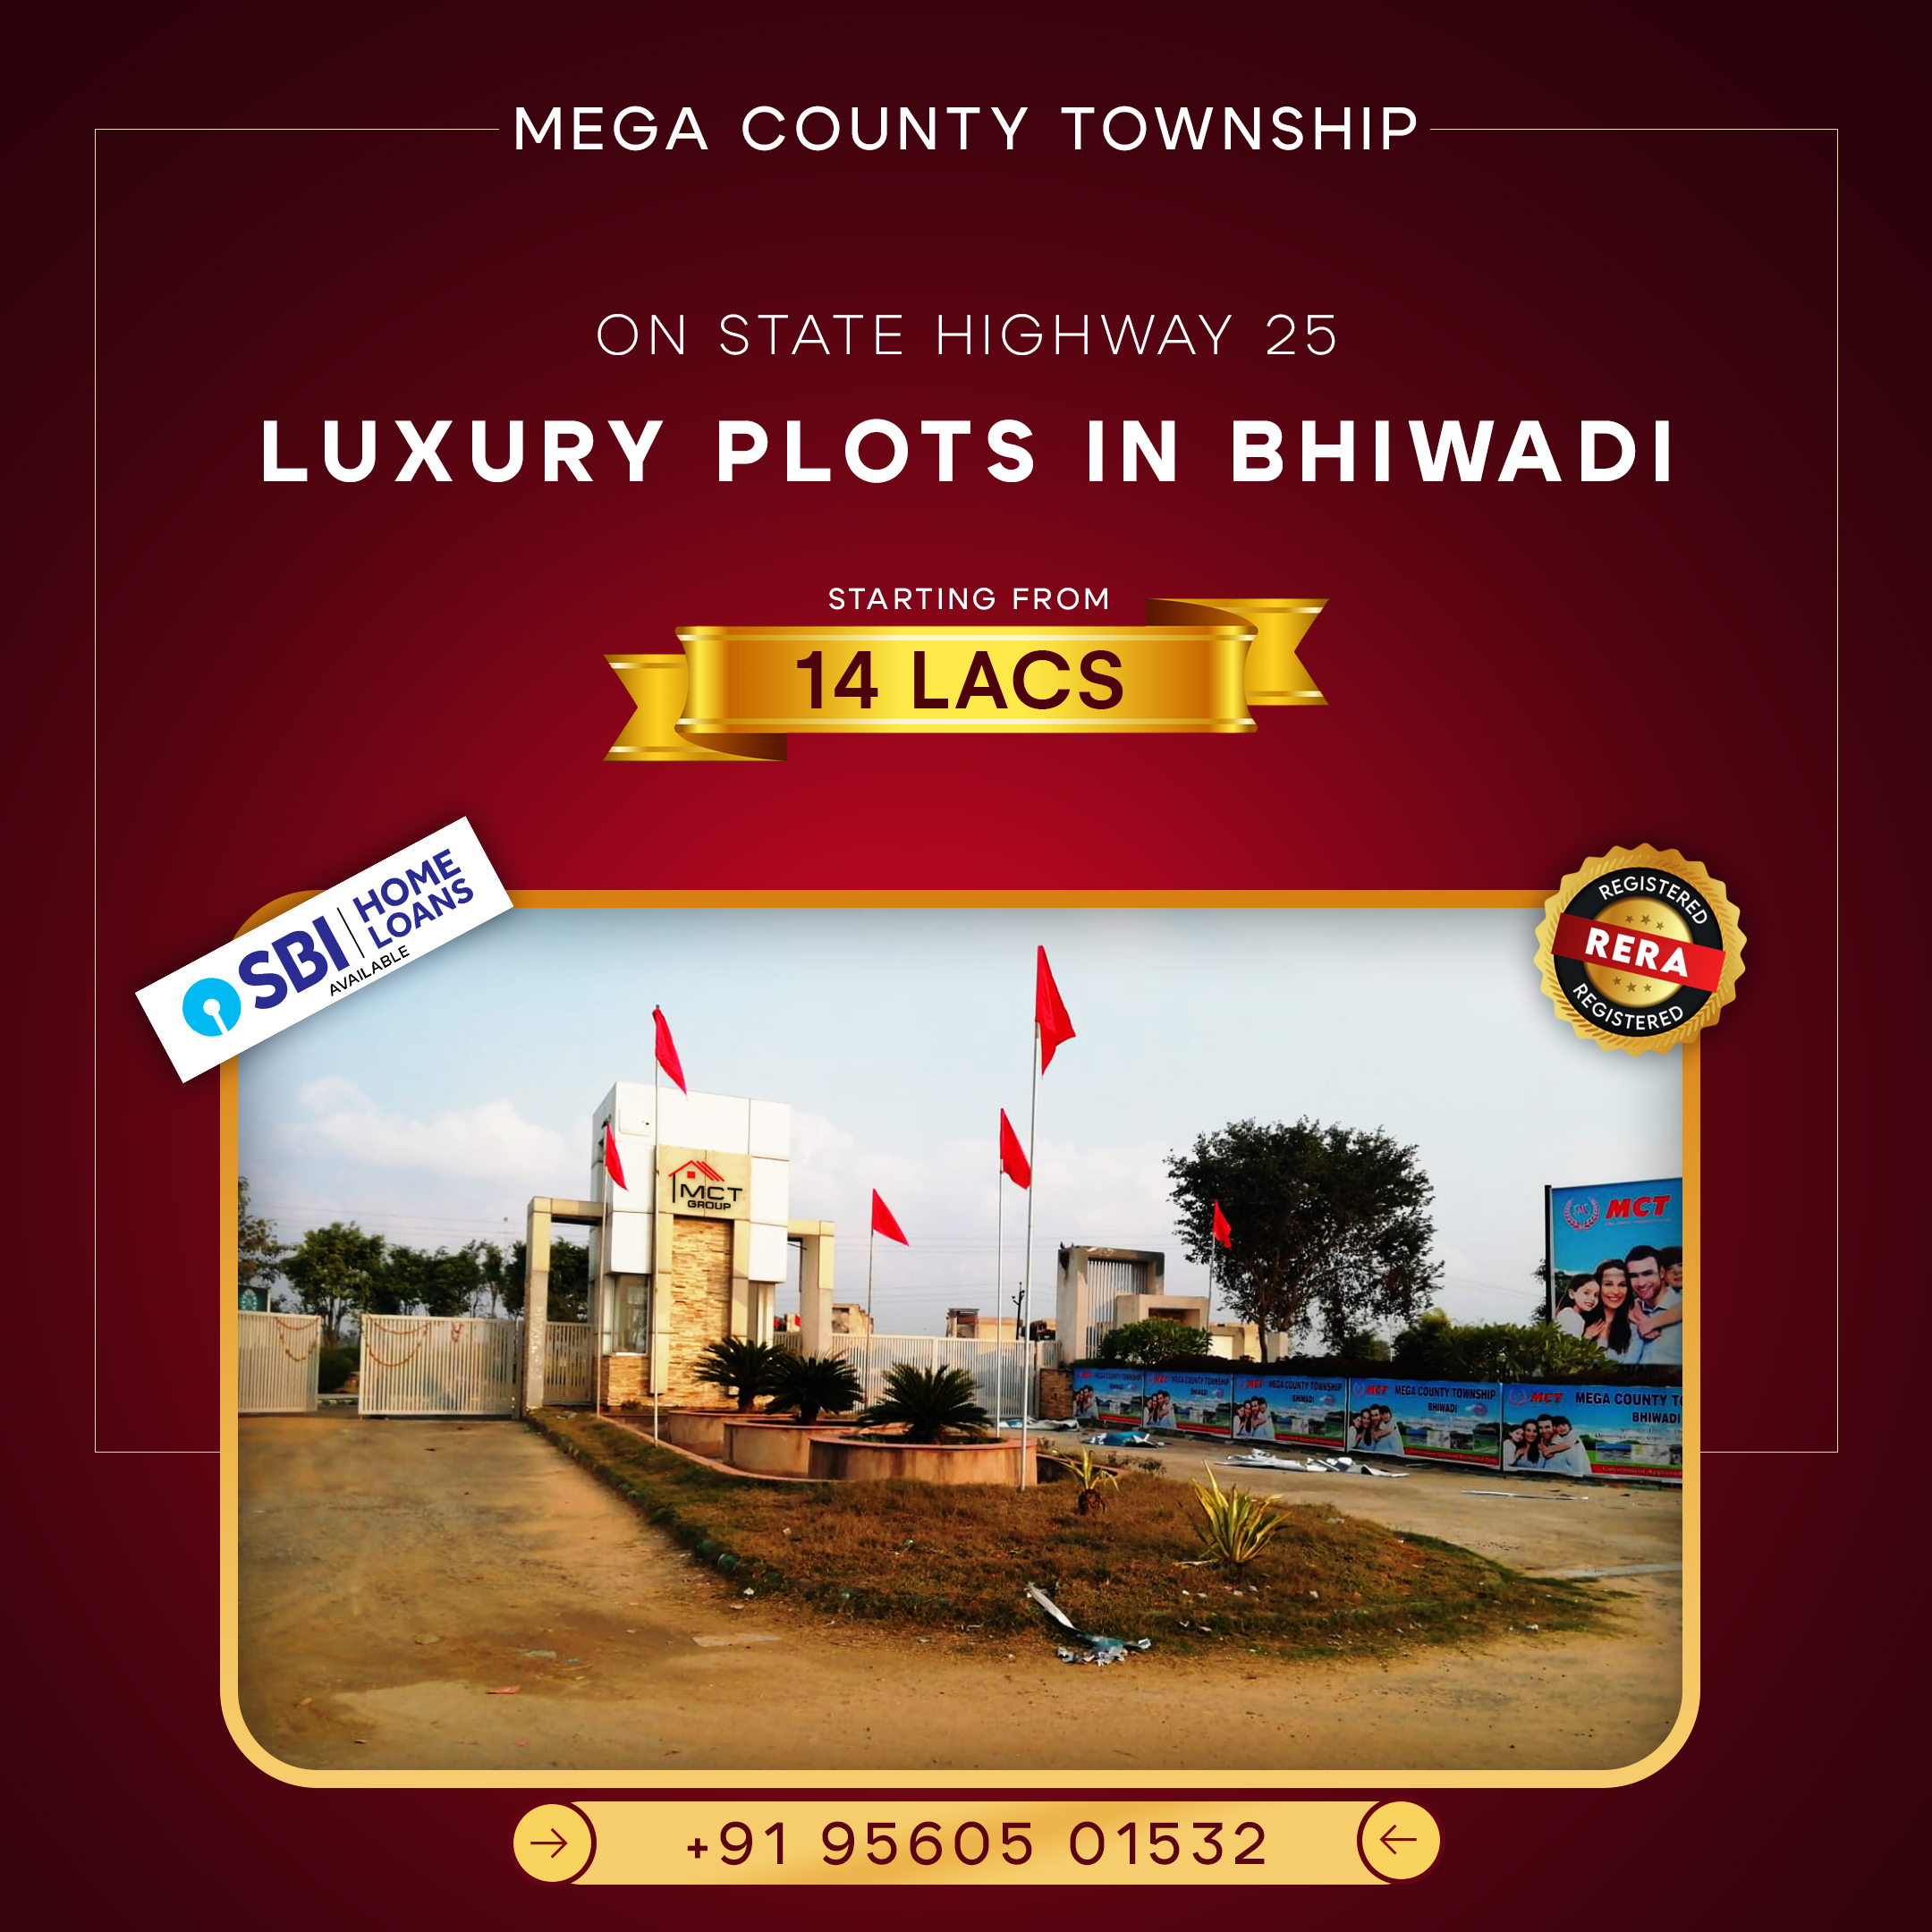 MEGA COUNTY TOWNSHIP

ON STATE HIGHWAY 25

LUXURY PLOTS IN BHIWADI

STARTING FROM Sd

   
   

TTI)
2)

— Eats 2 soscas =

&gt;) +9195605 01532 (